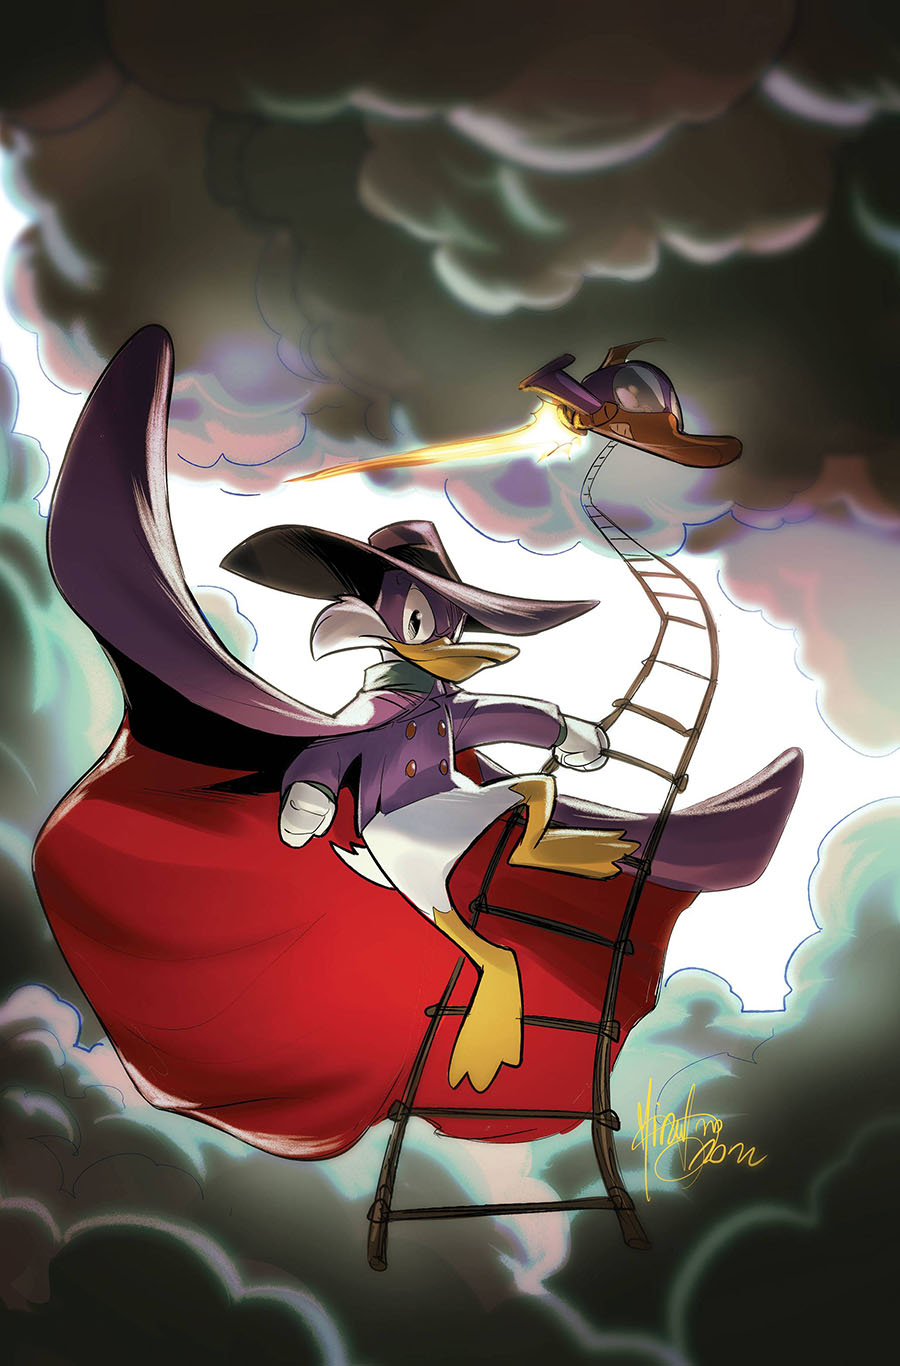 Darkwing Duck Vol 3 #3 Cover S Limited Edition Mirka Andolfo Virgin Cover